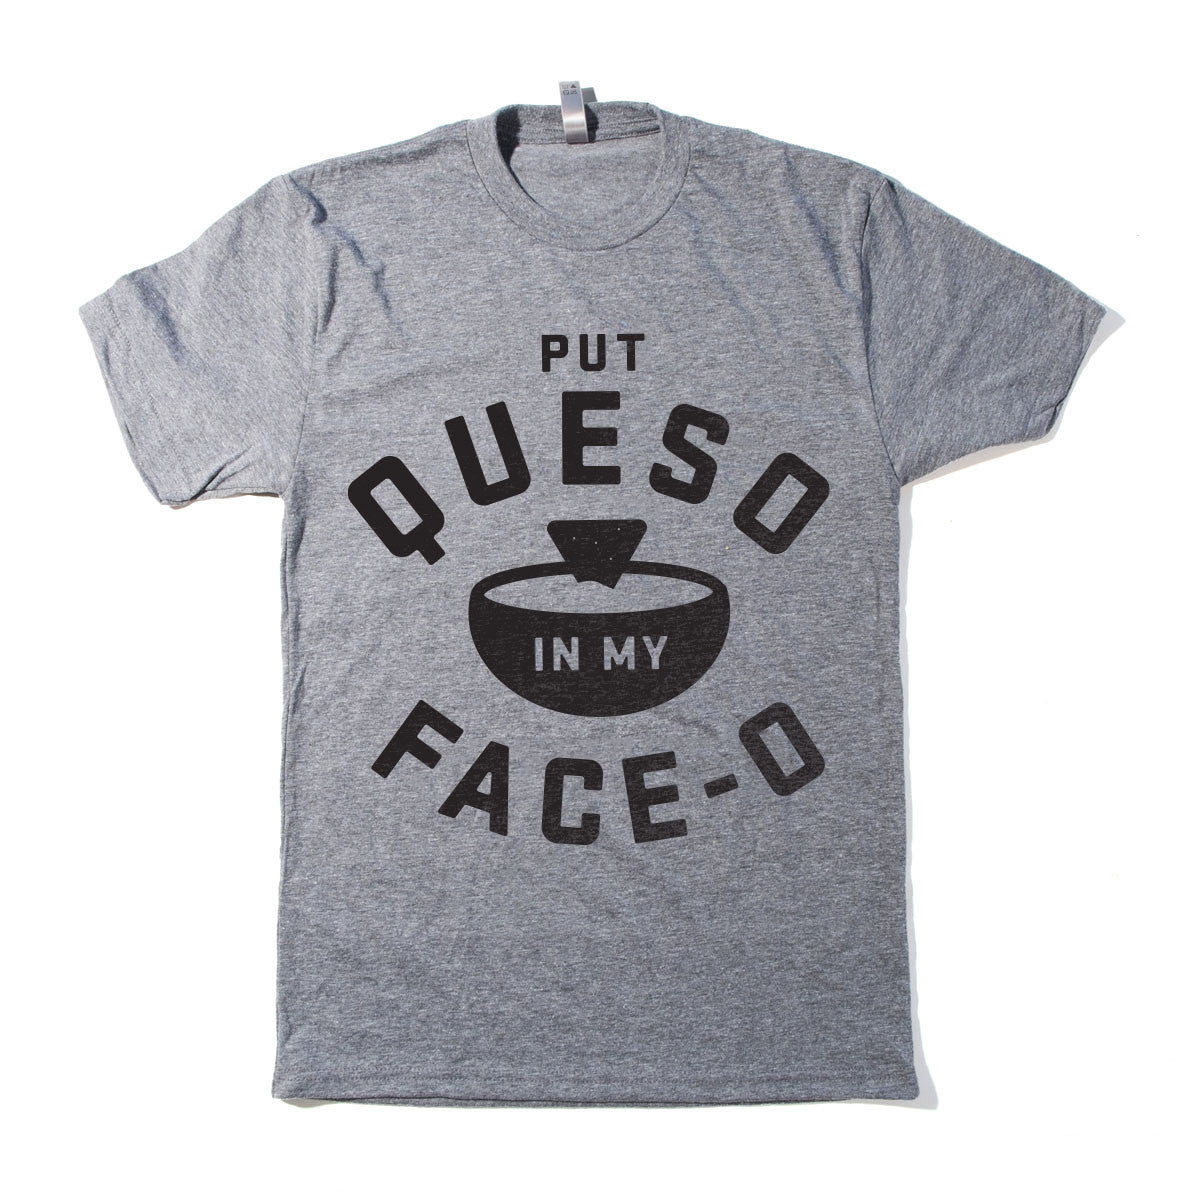 Put Queso In My Face-O Tee - Big Ok Clothing